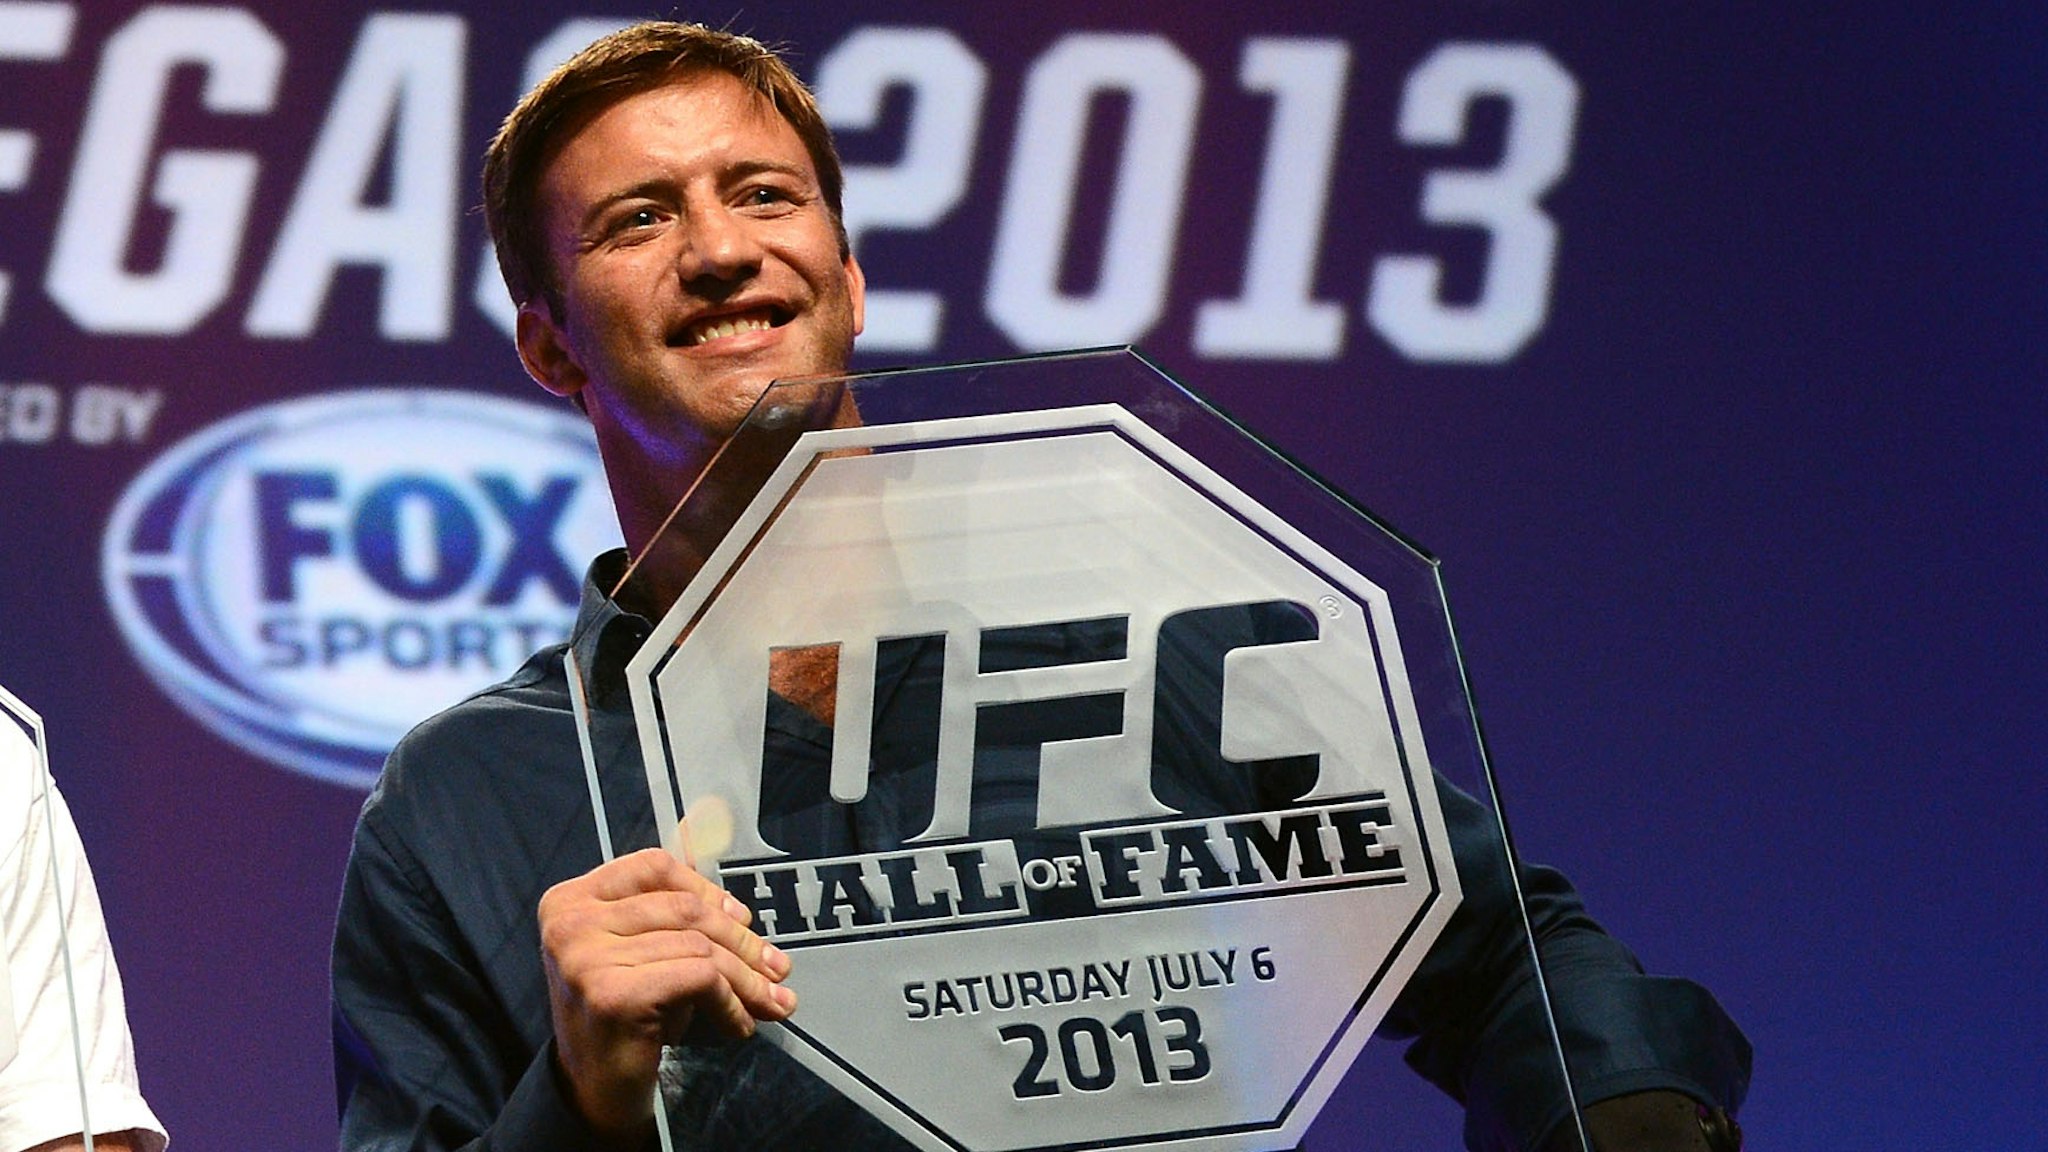 LAS VEGAS, NV - JULY 06: (L-R) Forrest Griffin and Stephan Bonnar pose for photos with their UFC Hall of Fame plaques during the UFC Fan Expo Las Vegas 2013 at the Mandalay Bay Convention Center on July 6, 2013 in Las Vegas, Nevada.